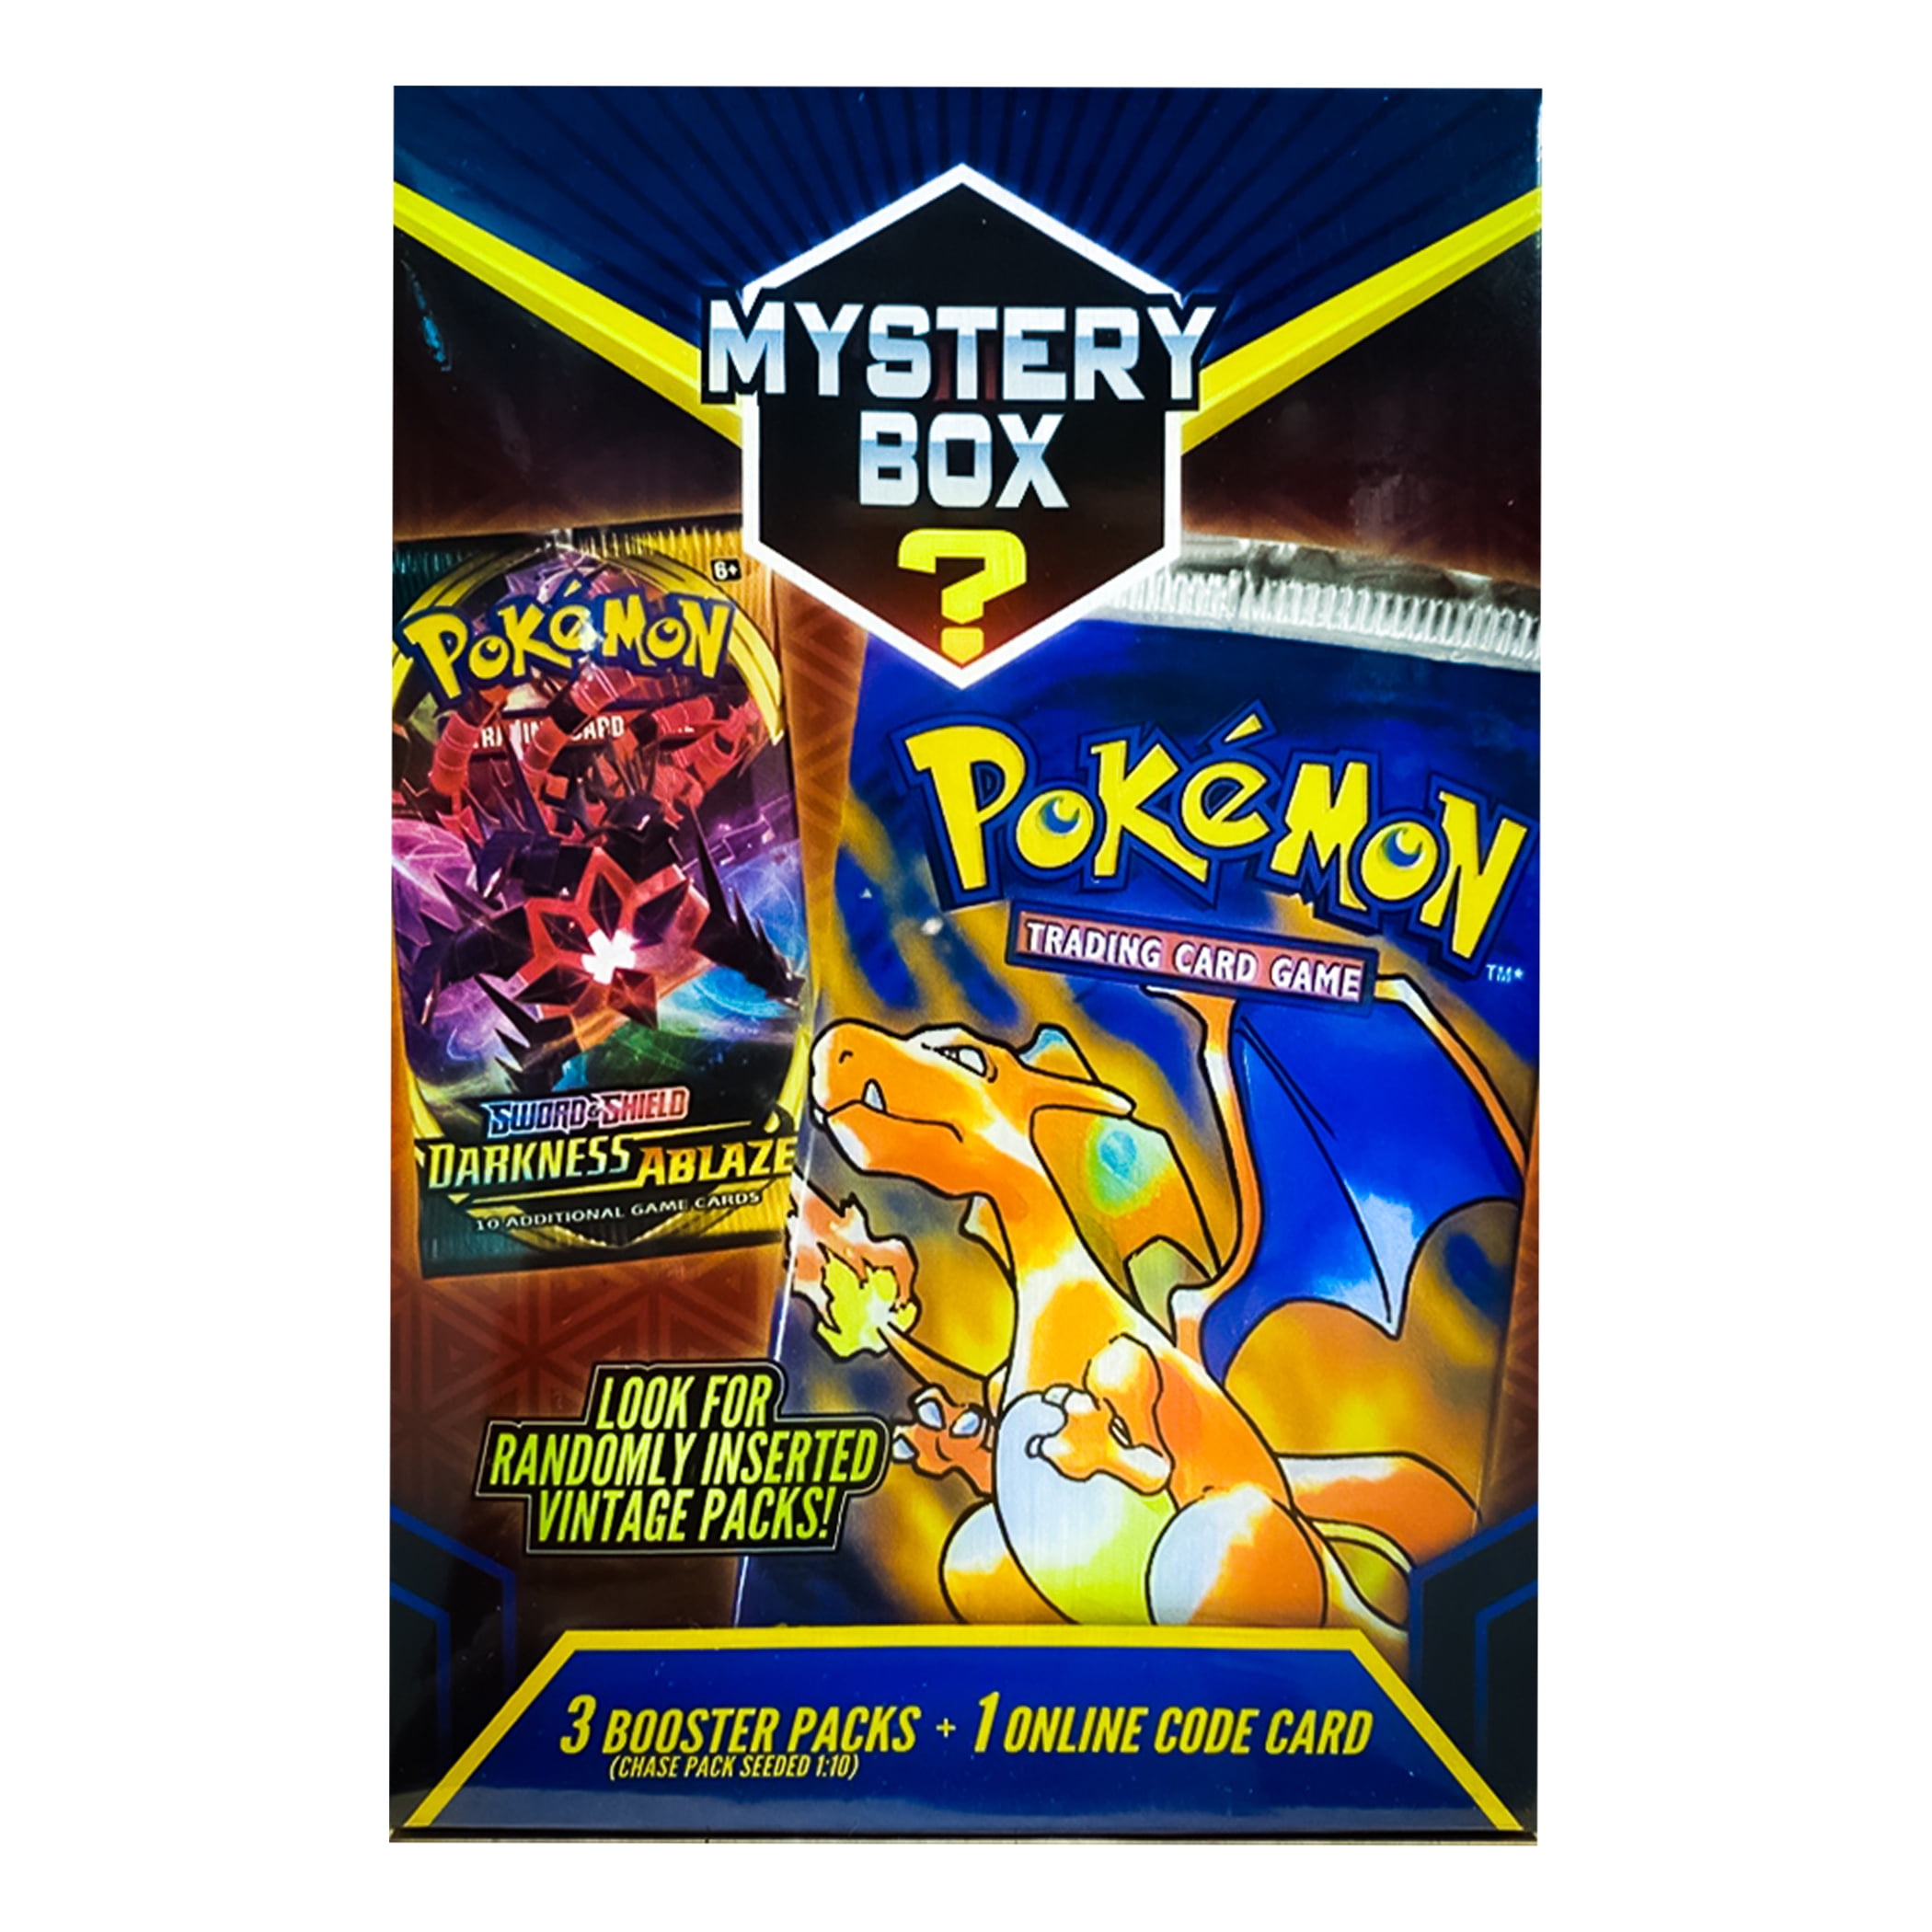 read description! cards from all sets Including Japanese Pokemon mystery box 